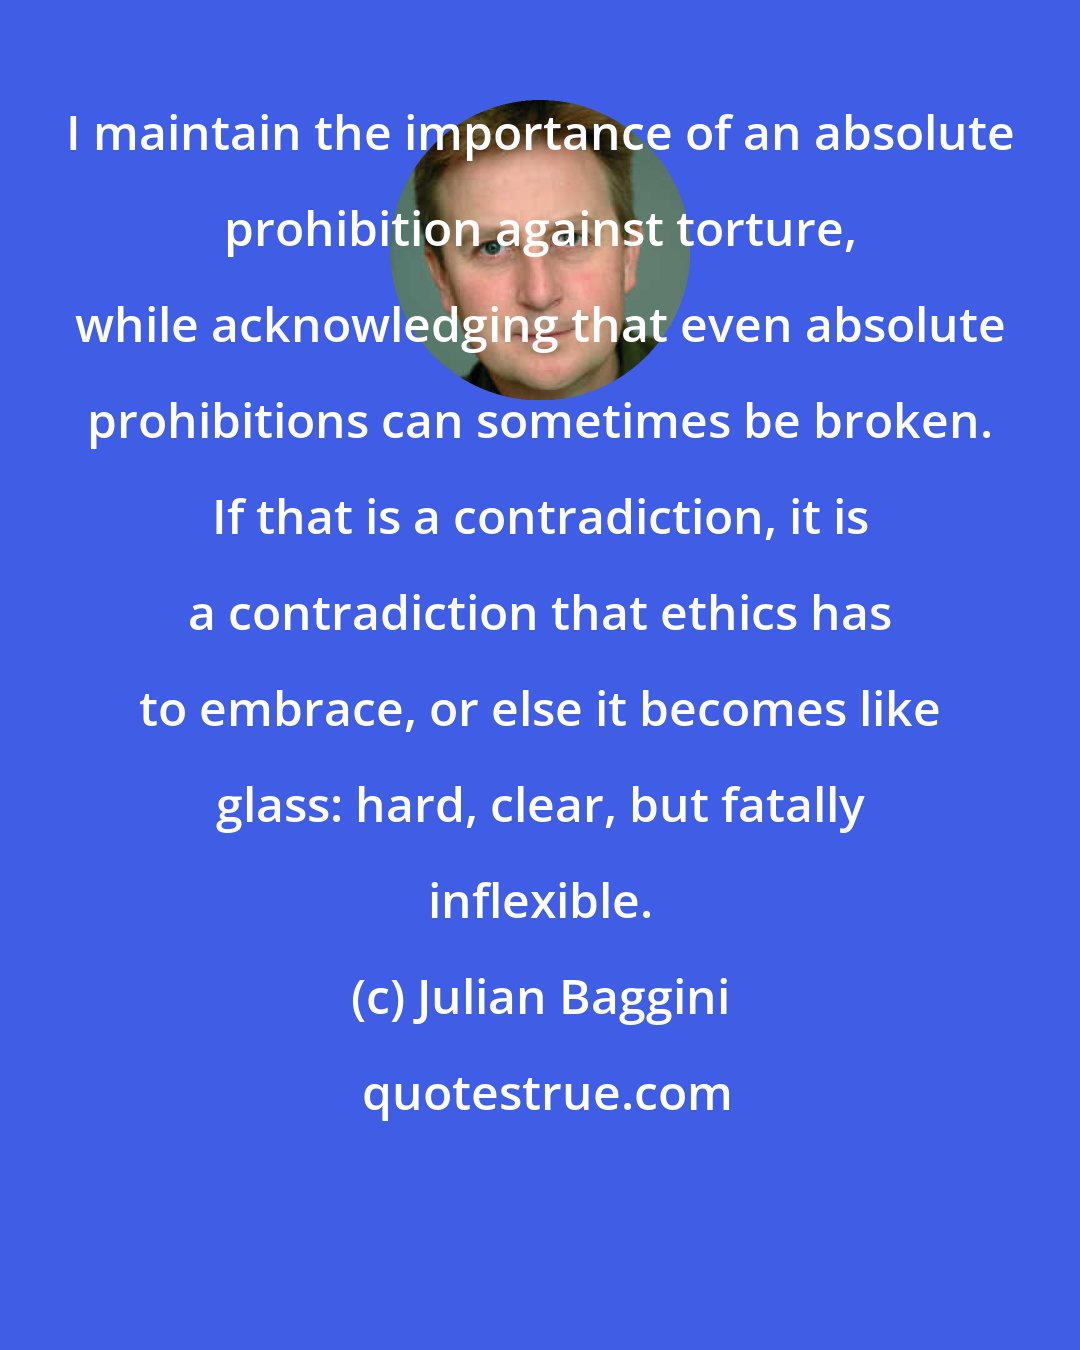 Julian Baggini: I maintain the importance of an absolute prohibition against torture, while acknowledging that even absolute prohibitions can sometimes be broken. If that is a contradiction, it is a contradiction that ethics has to embrace, or else it becomes like glass: hard, clear, but fatally inflexible.